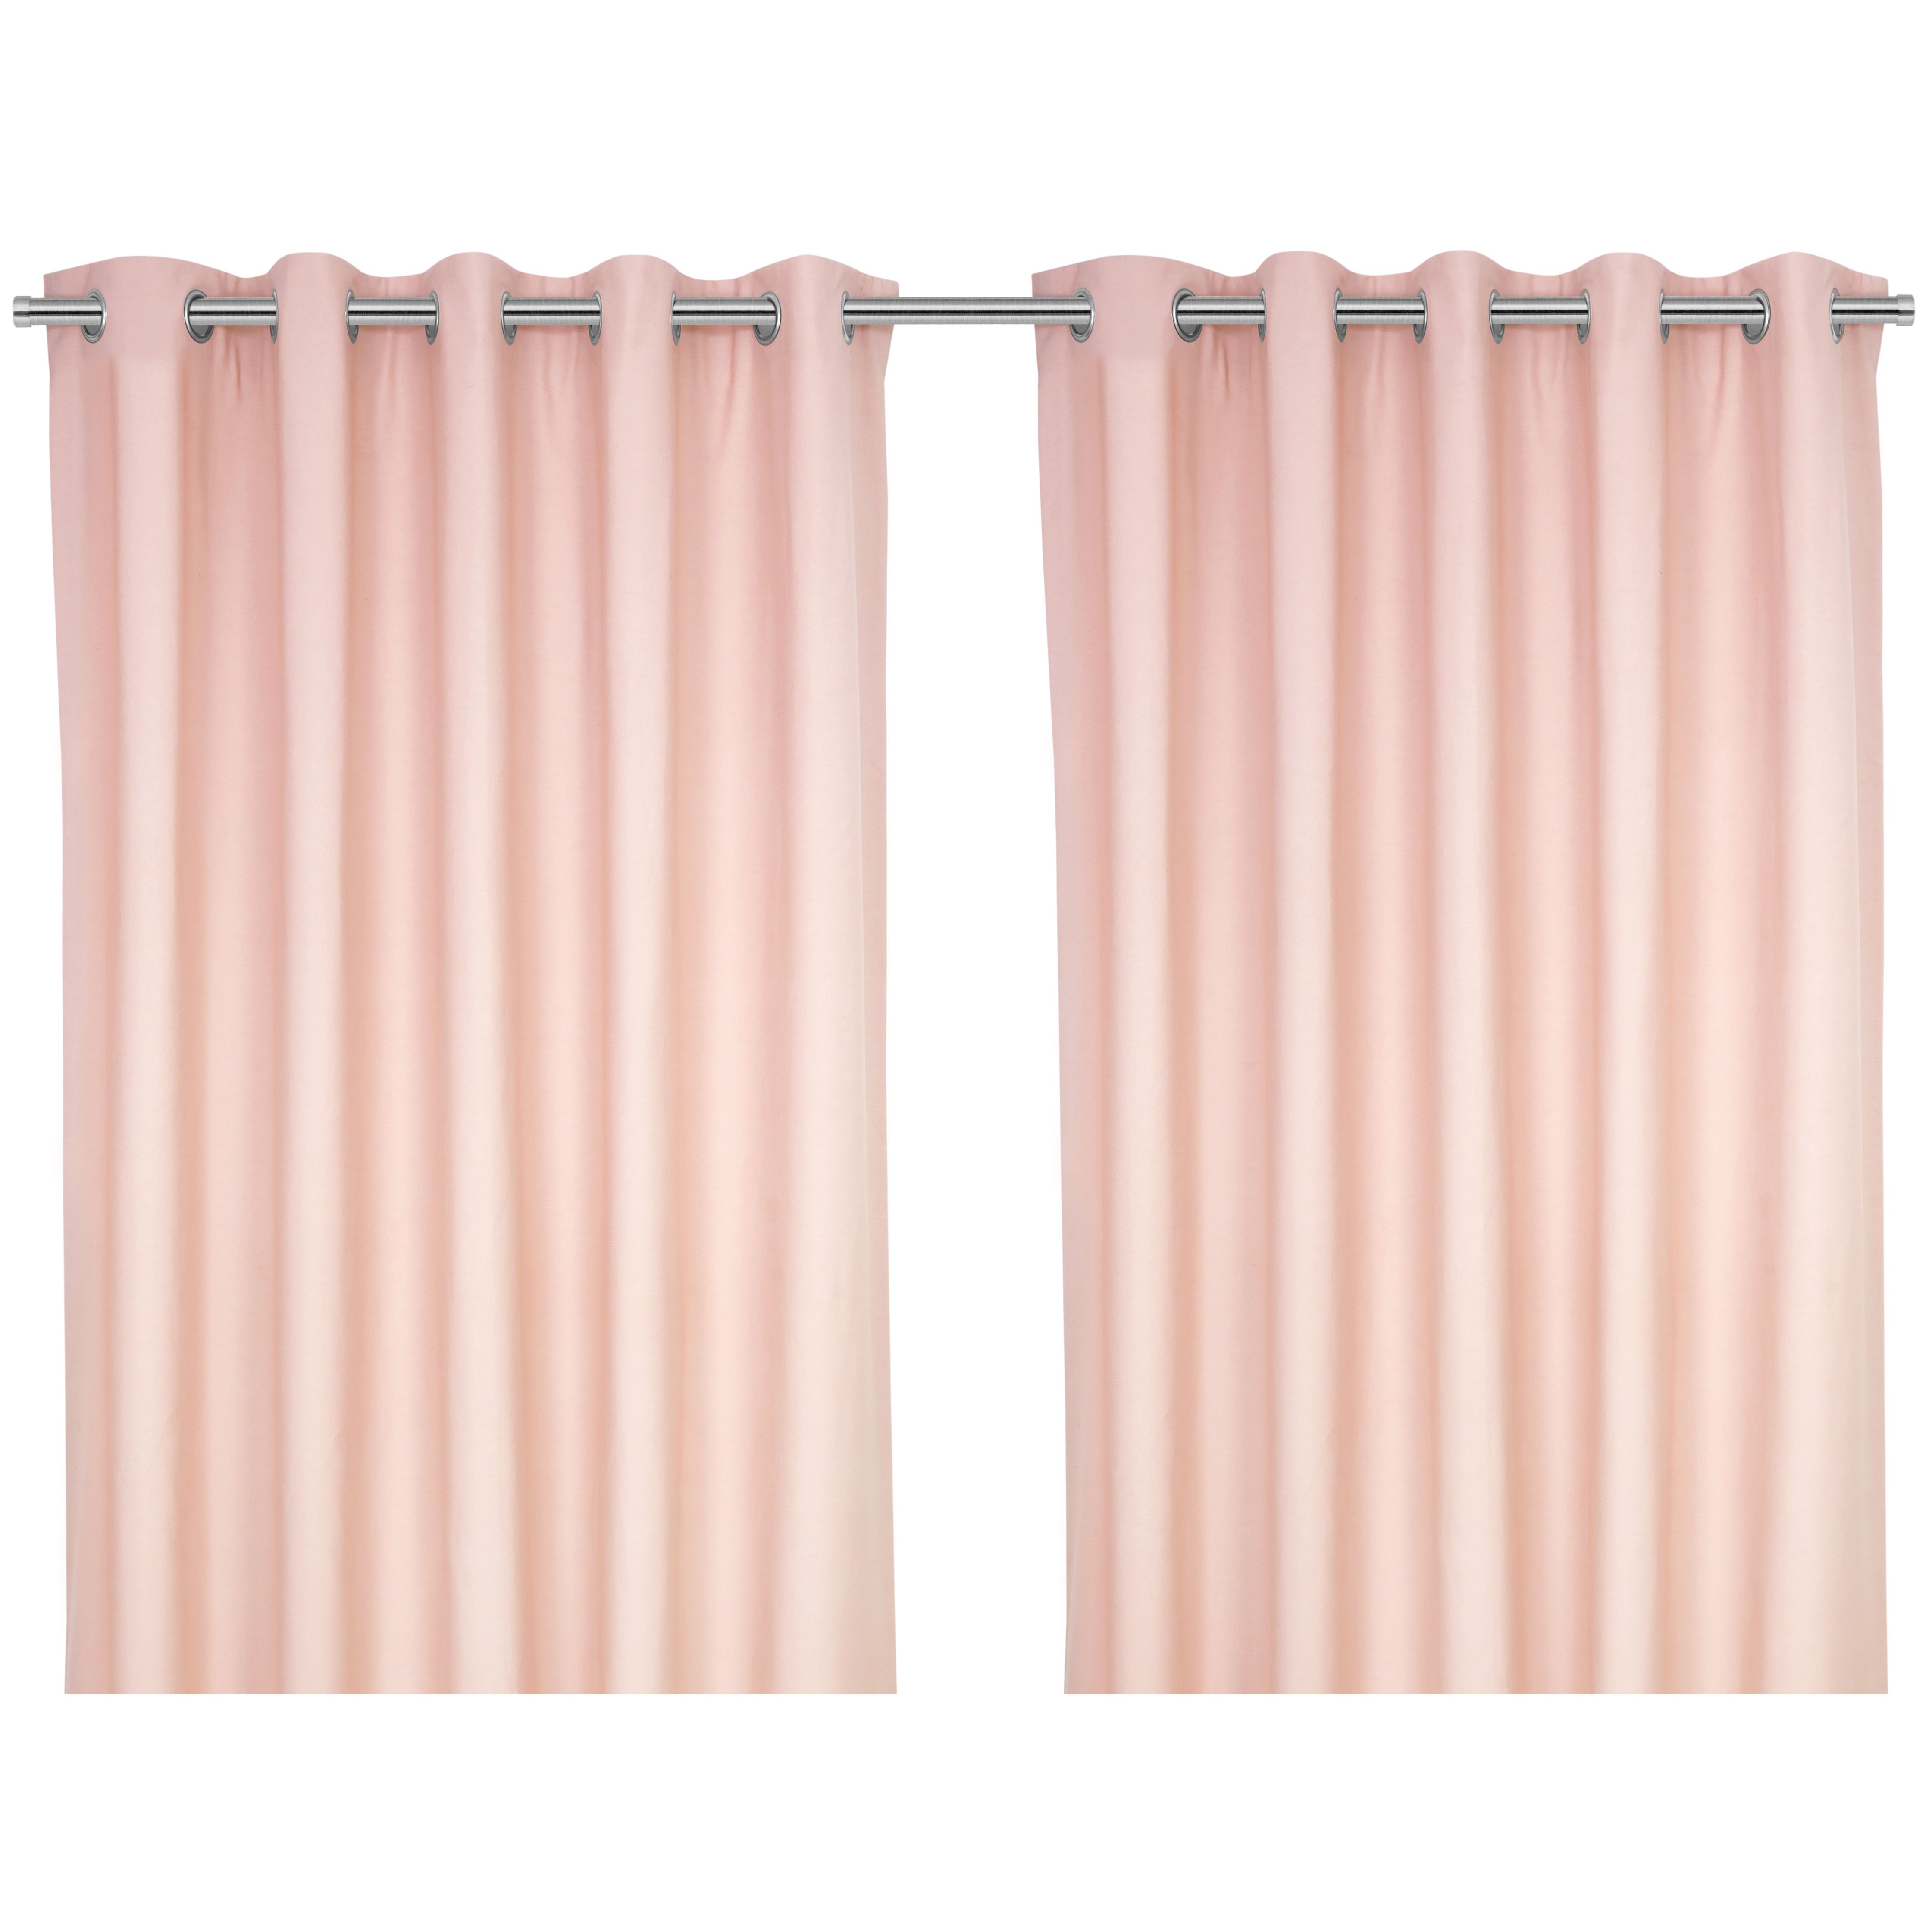 Hiva Pink Solid dyed Lined Eyelet Curtain (W)228cm (L)228cm, Pair